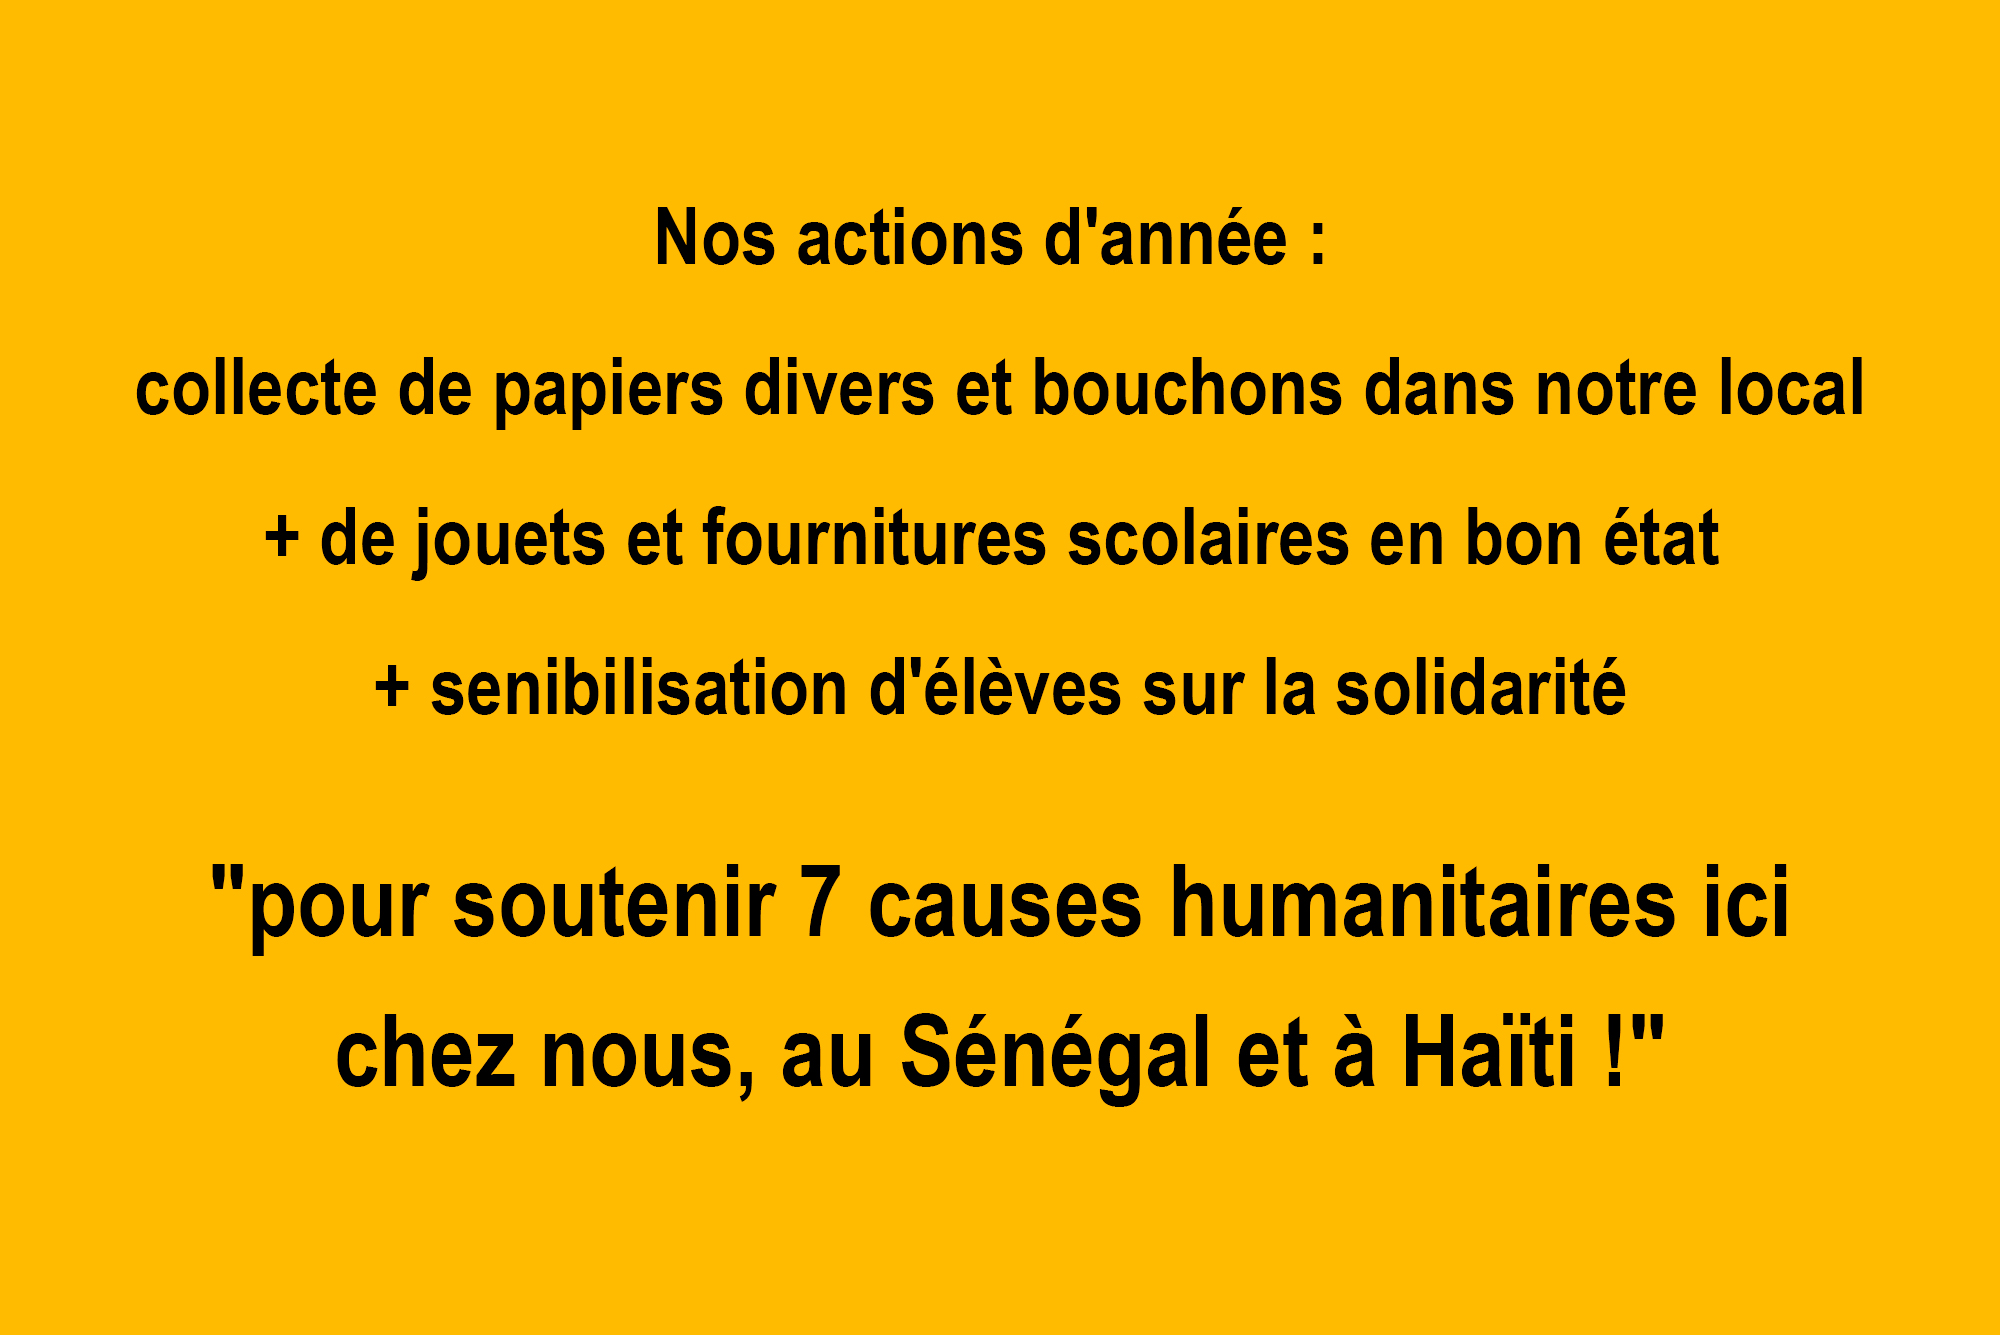 nos-actions02.jpg